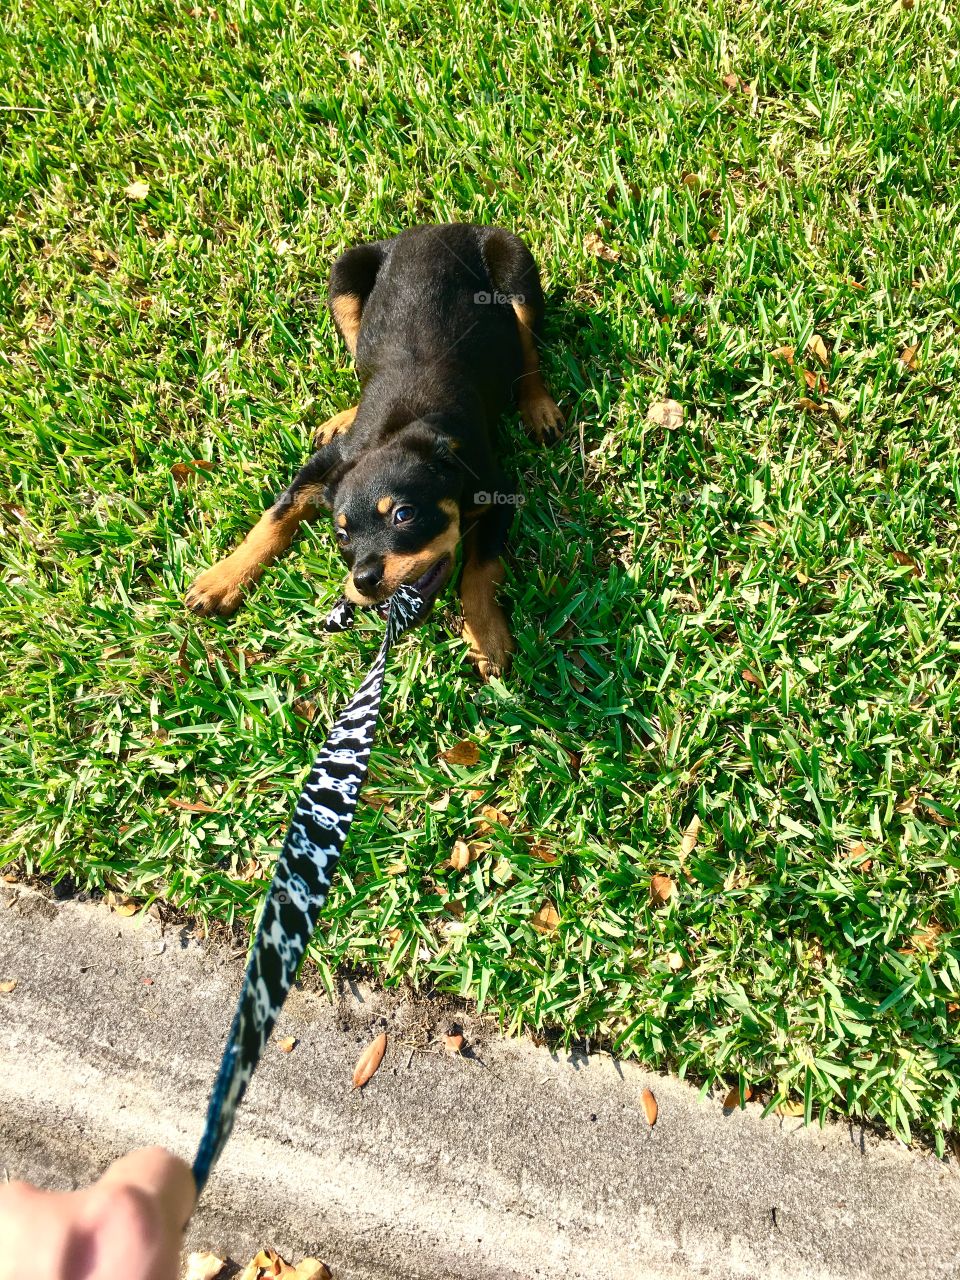 Such a tough lil’ pupper on his walk